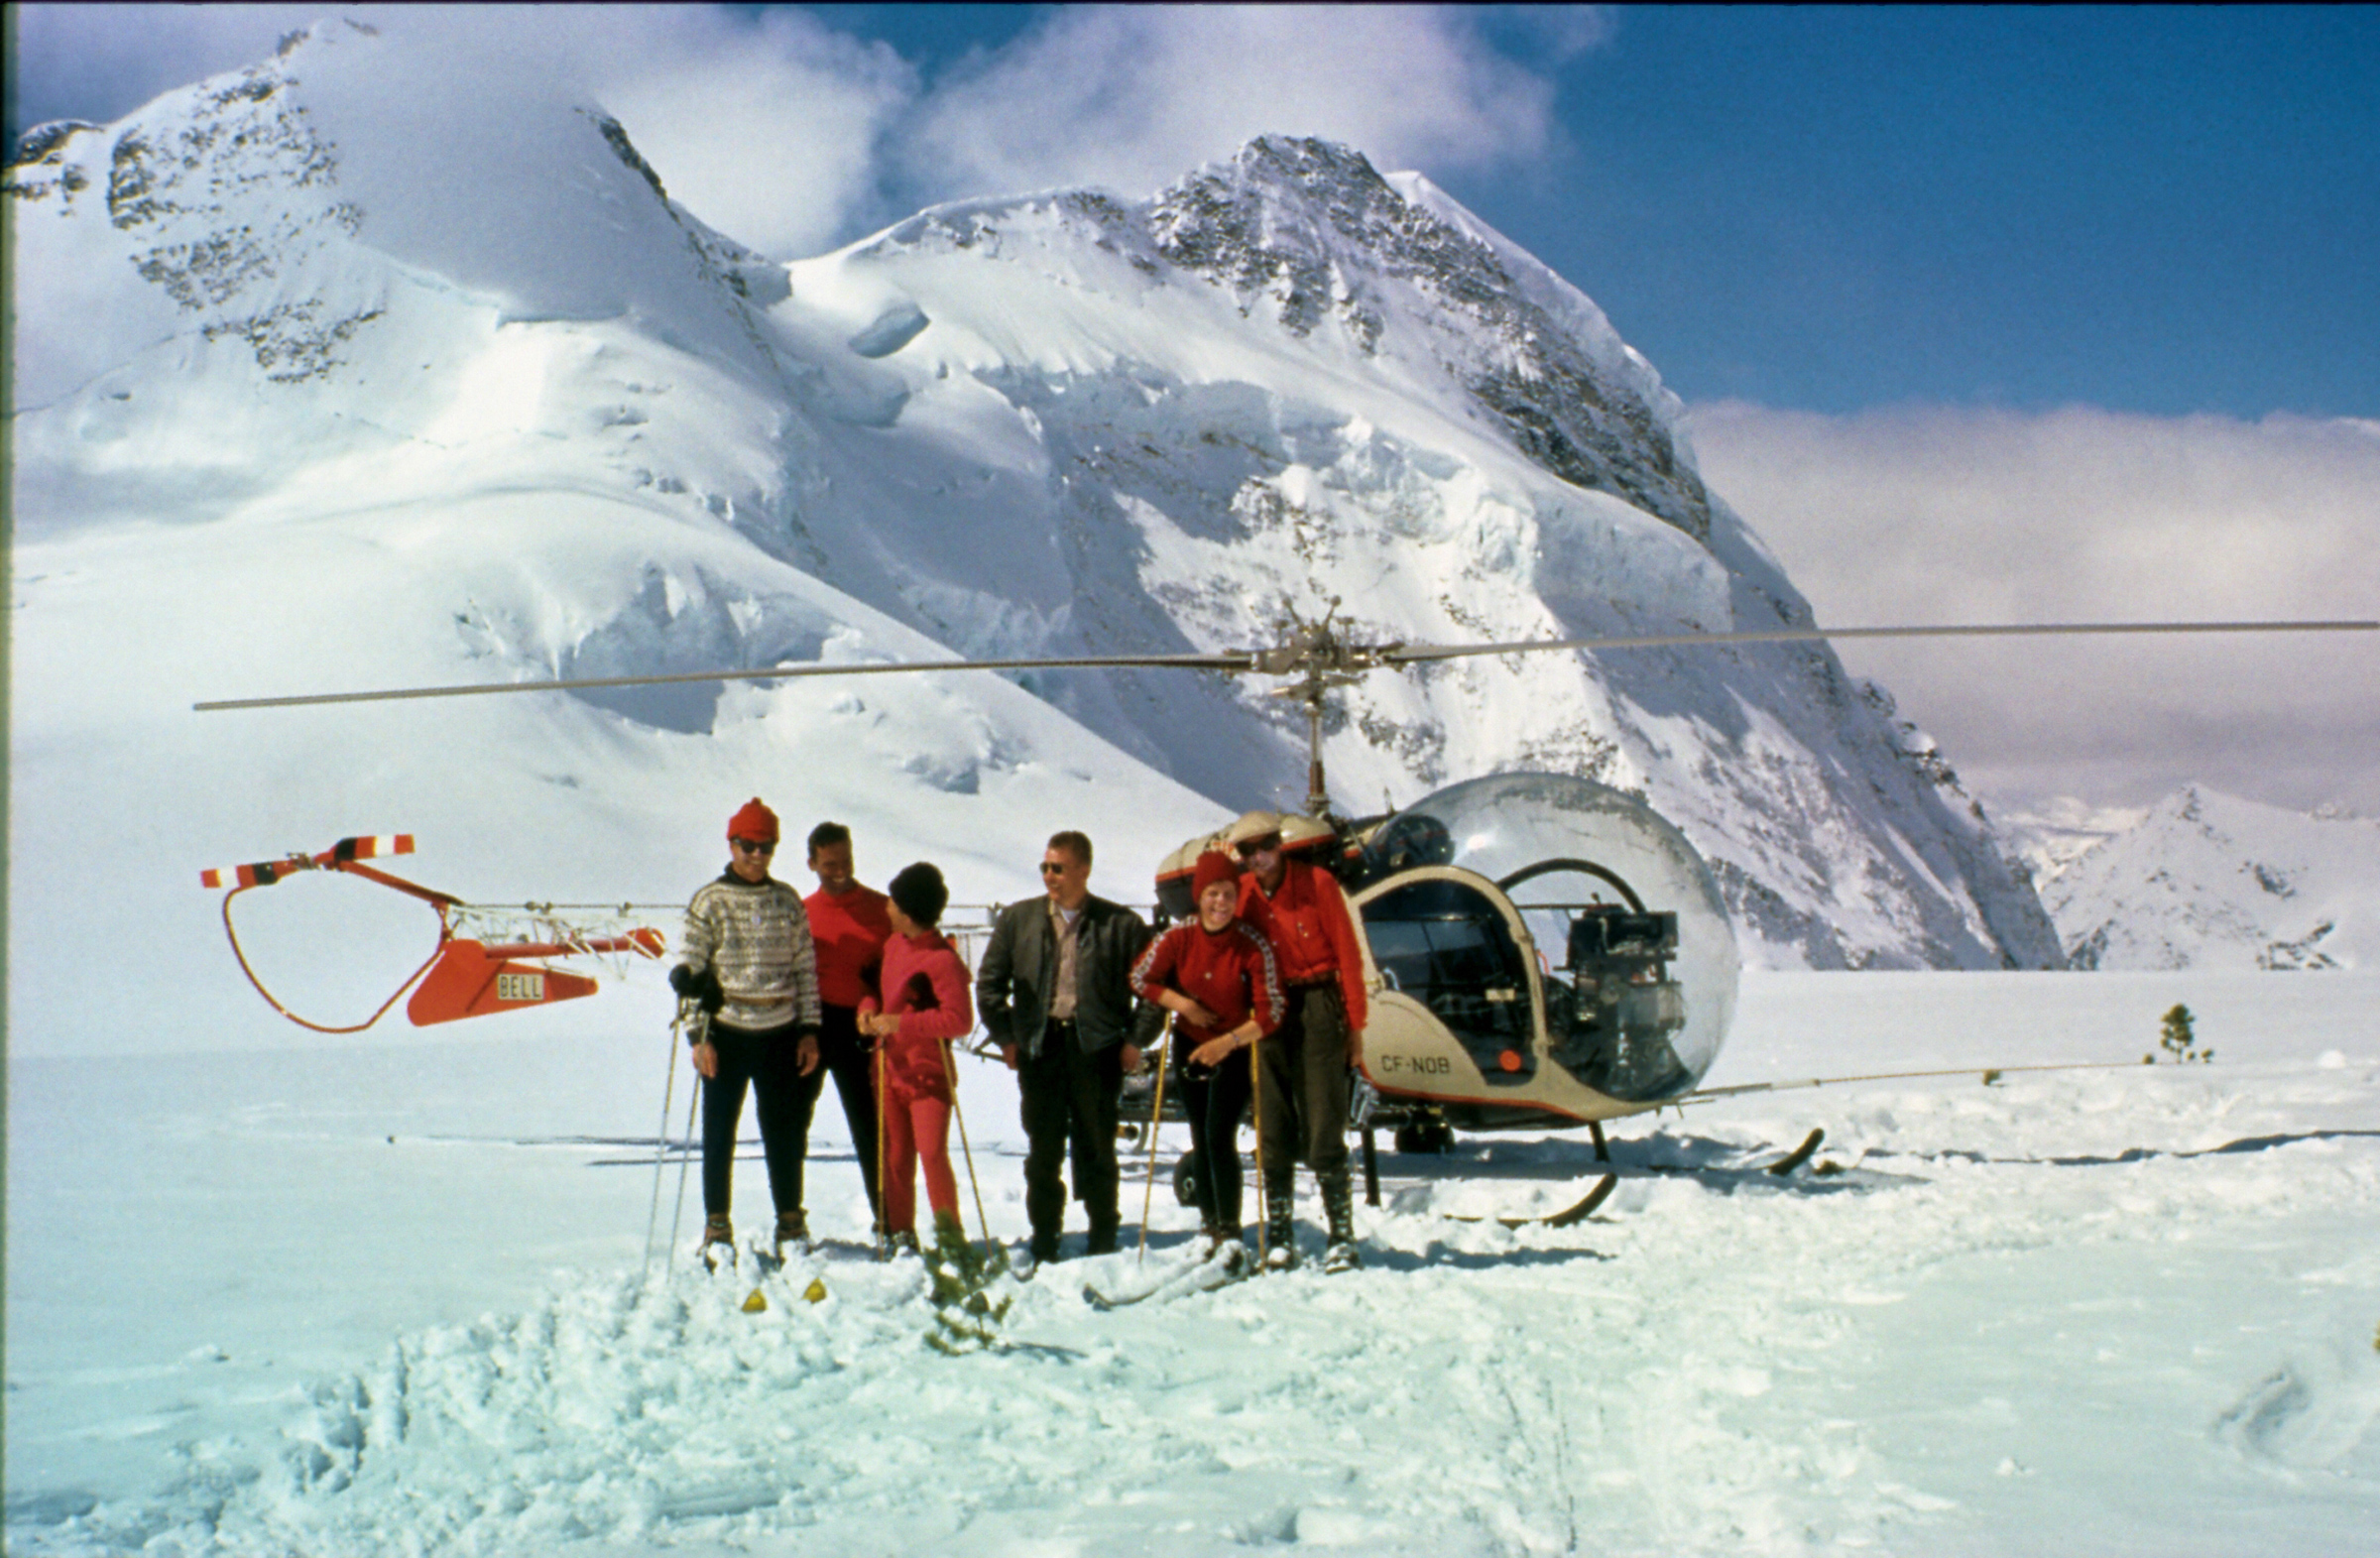 Hans Gmoser and the first crew heli-skiing in the Bugaboos in 1969